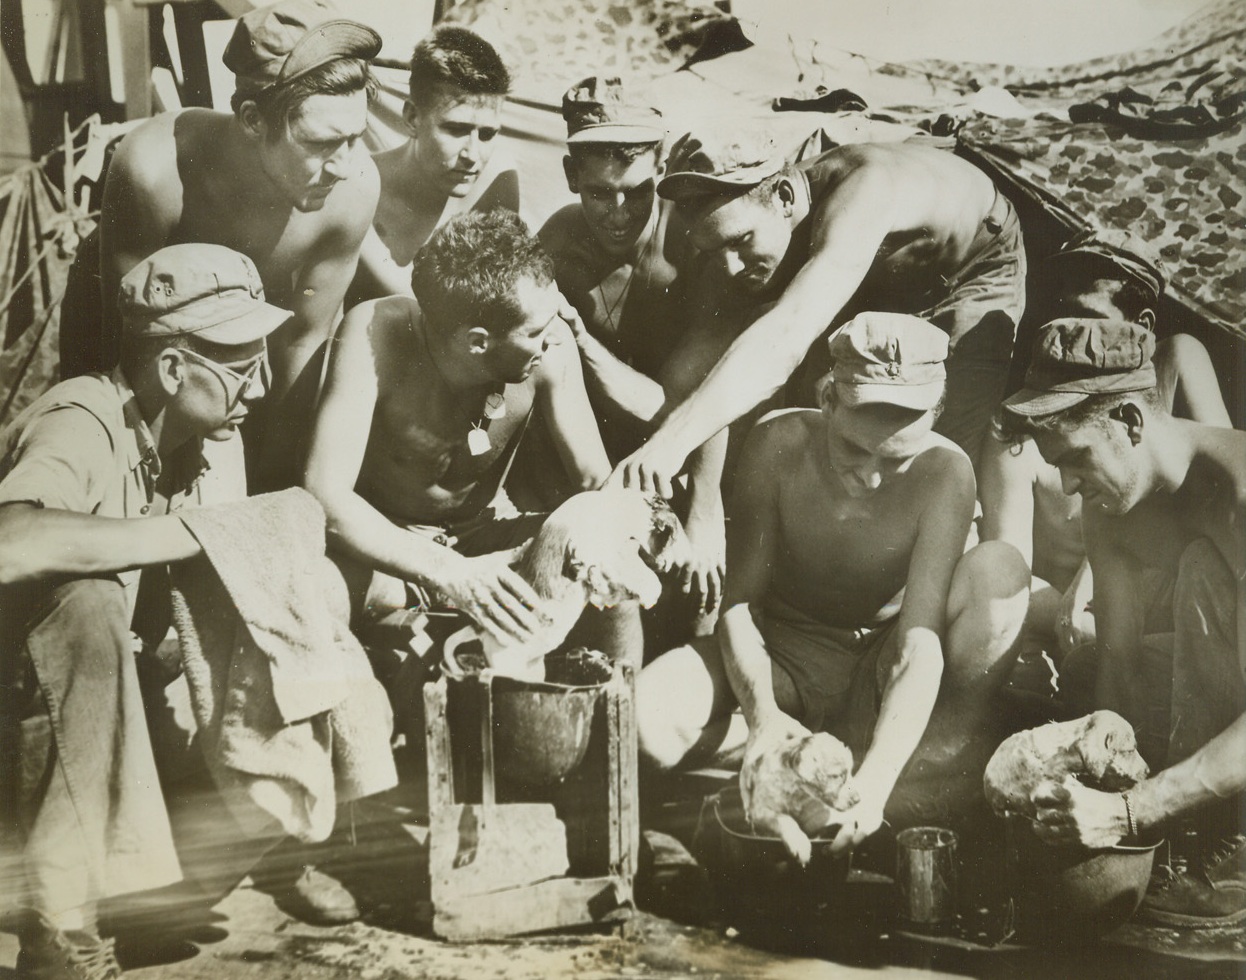 Those Versatile Helmets!, 7/27/1944. At Sea – Here is a new use for those handy GI “toppers” – a scrub tub for pups! U.S. Marines, headed for a landing on Guam, primp their pets for the occasion, receiving advice – and some help – from their buddies.Credit: U.S. Marine Corps photo from ACME;